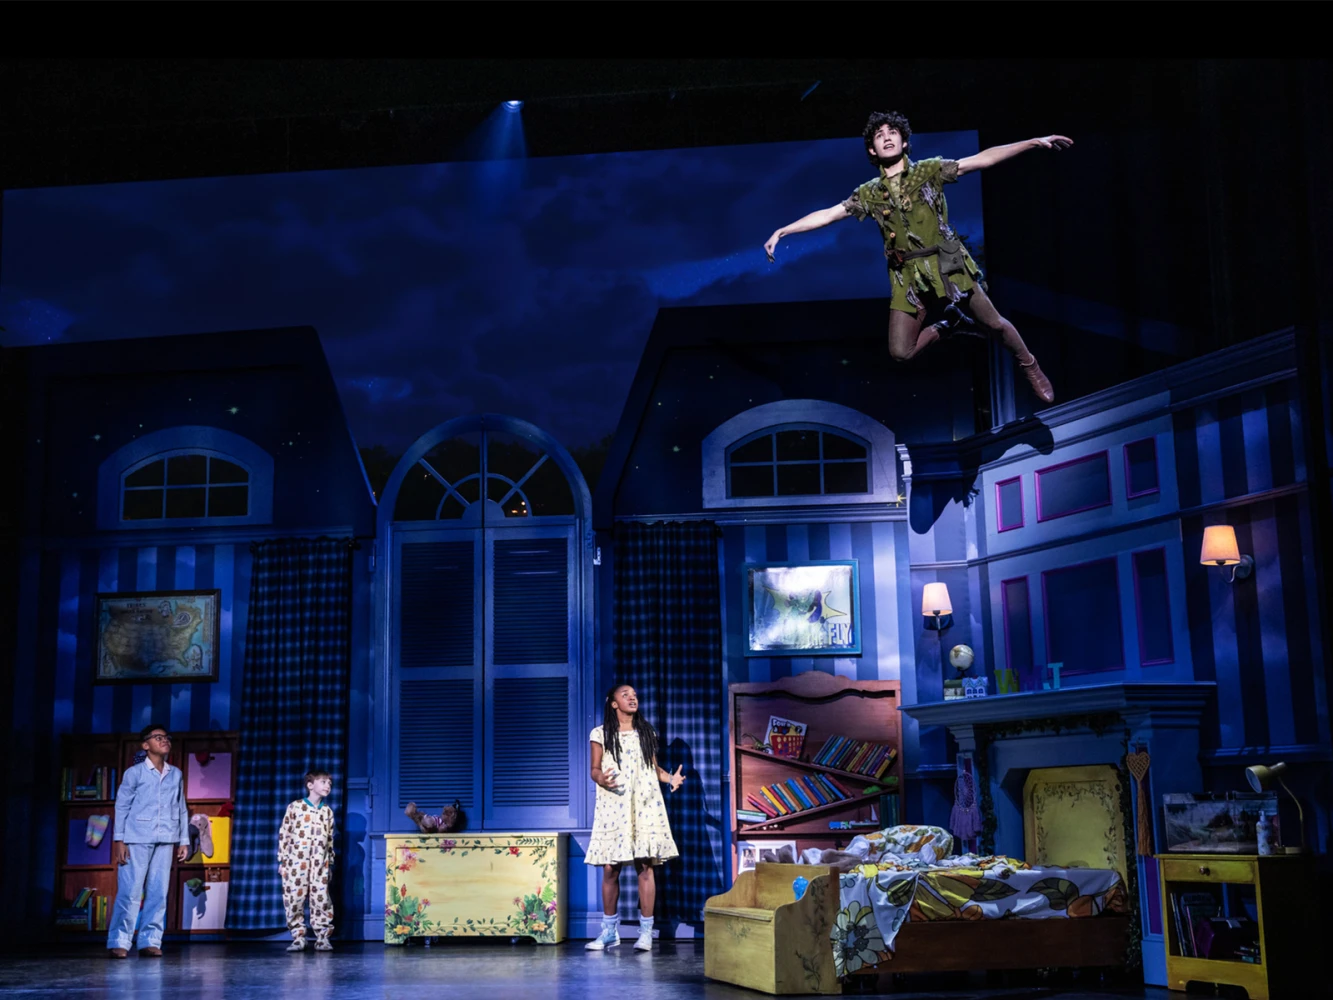 Peter Pan at Segerstrom: What to expect - 1